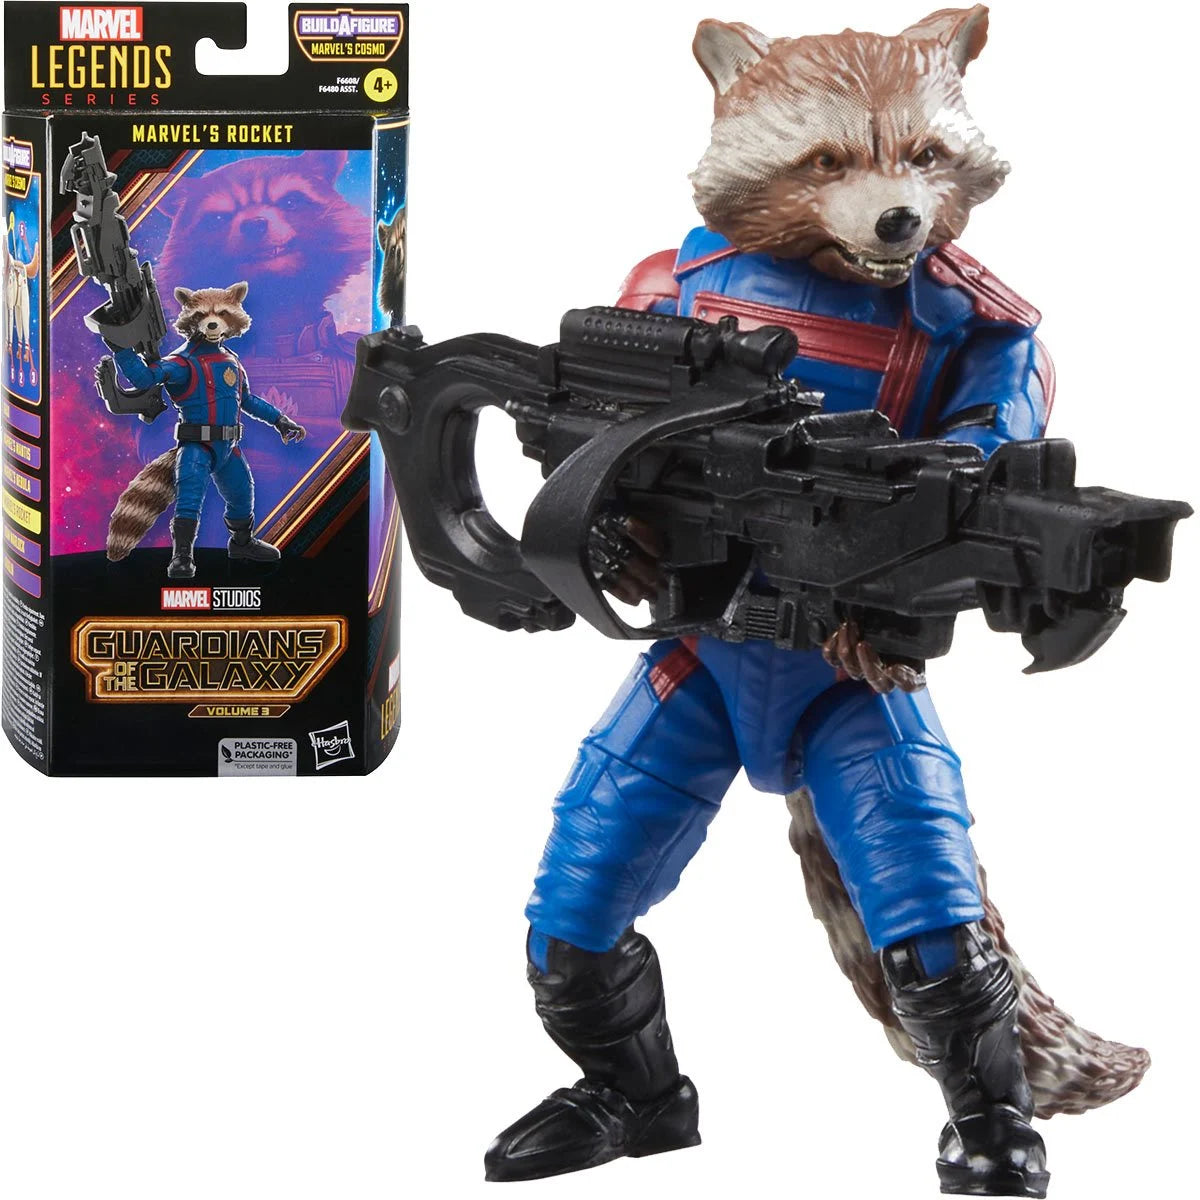 Guardians of the Galaxy Vol. 3 Marvel Legends Rocket 6-Inch Action Figure